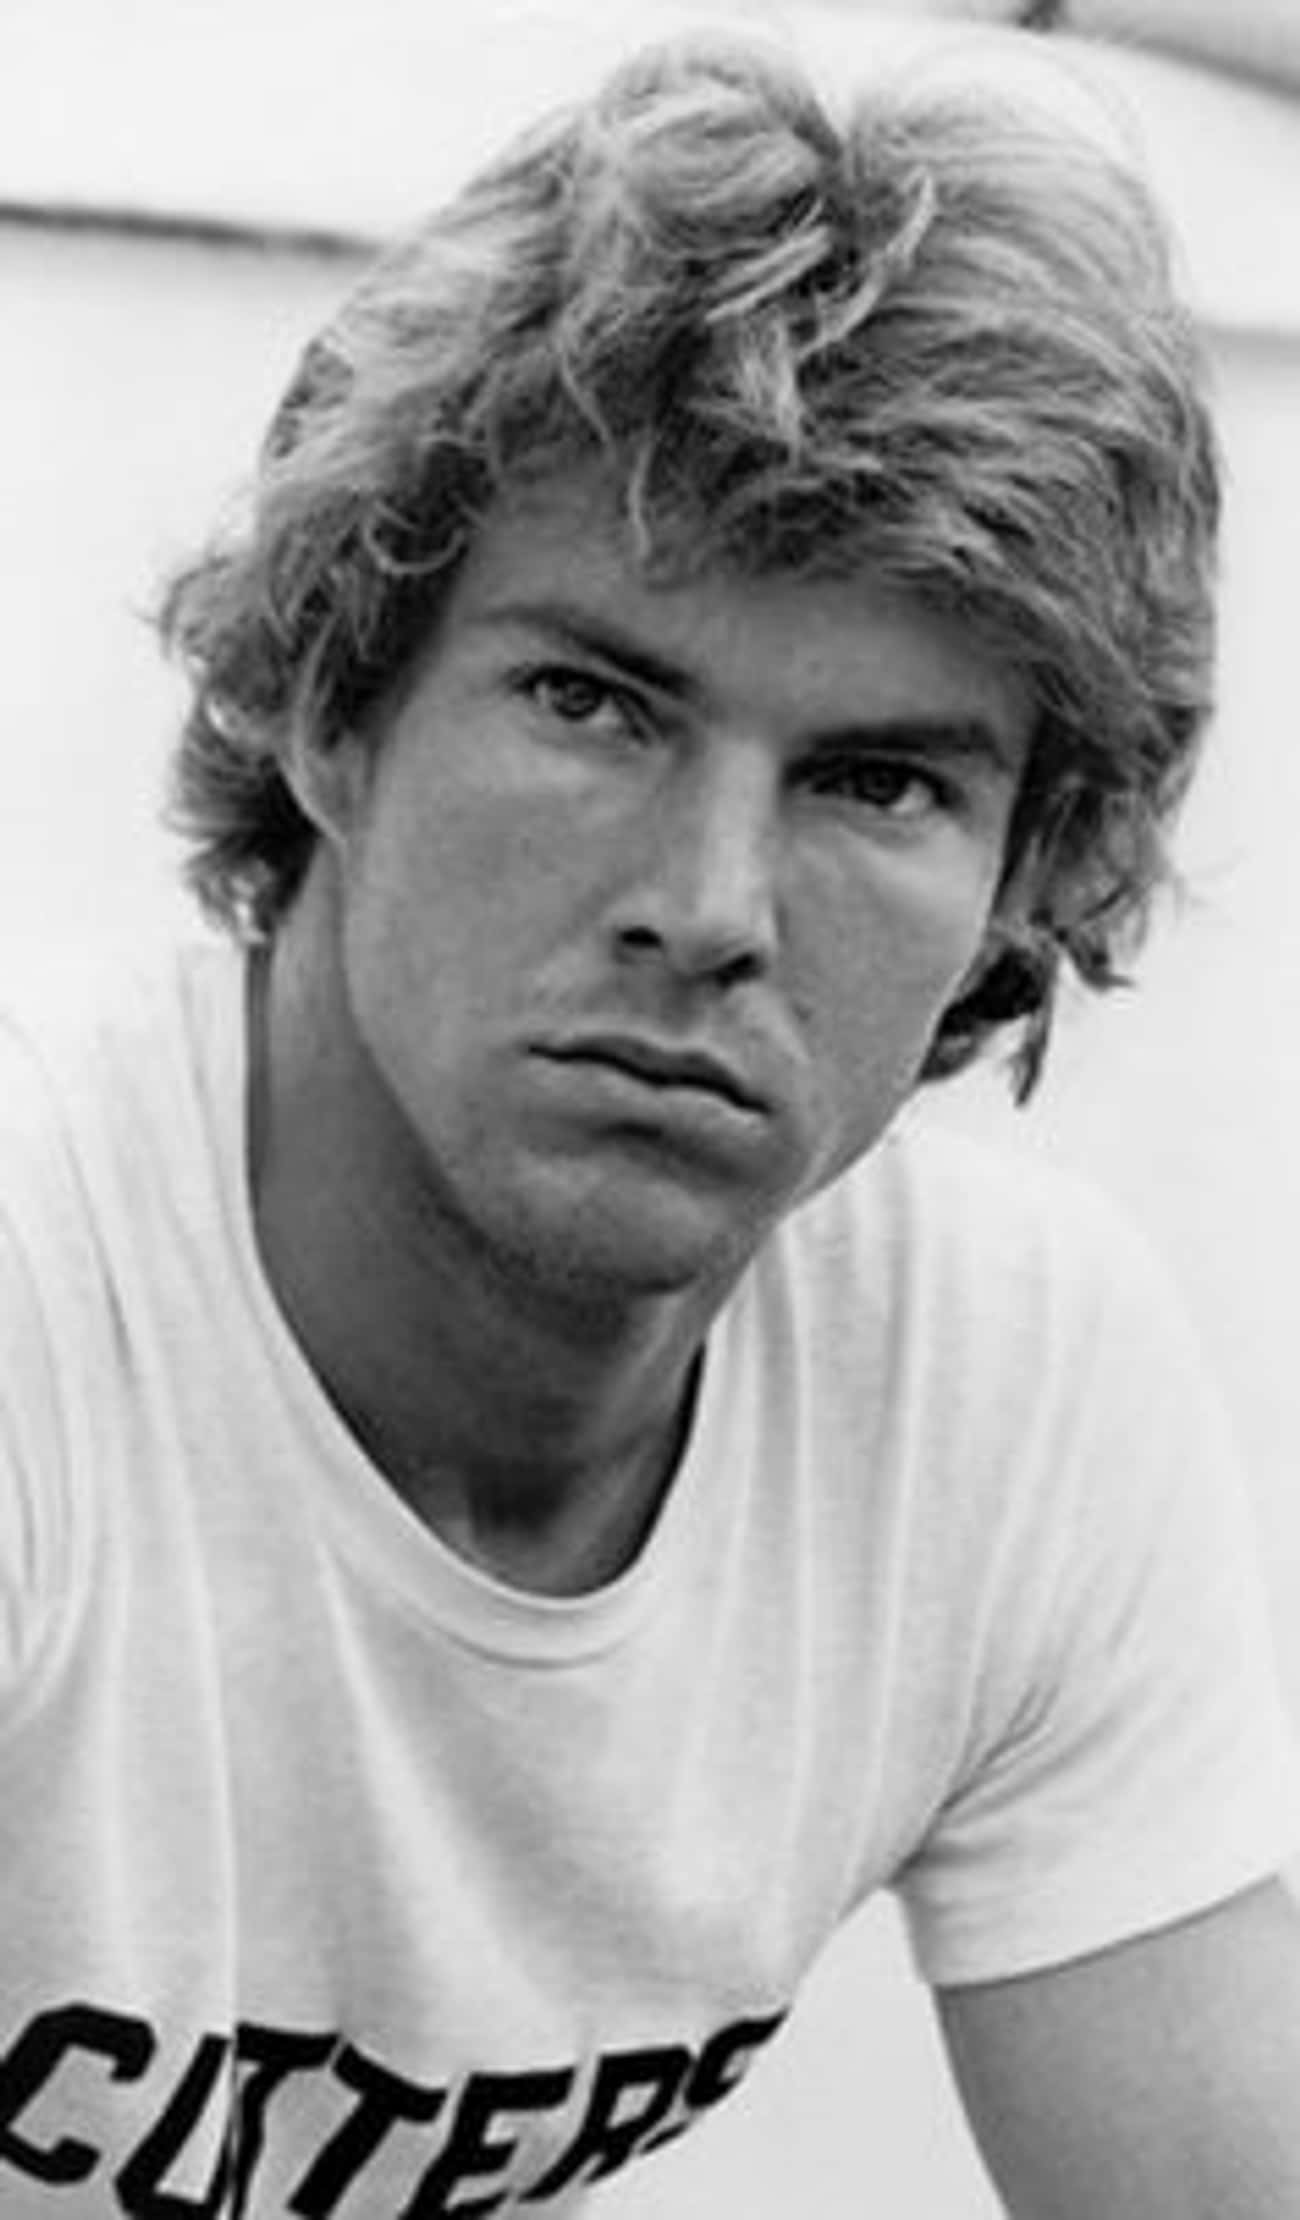 Young Dennis Quaid in White Printed T-Shirt